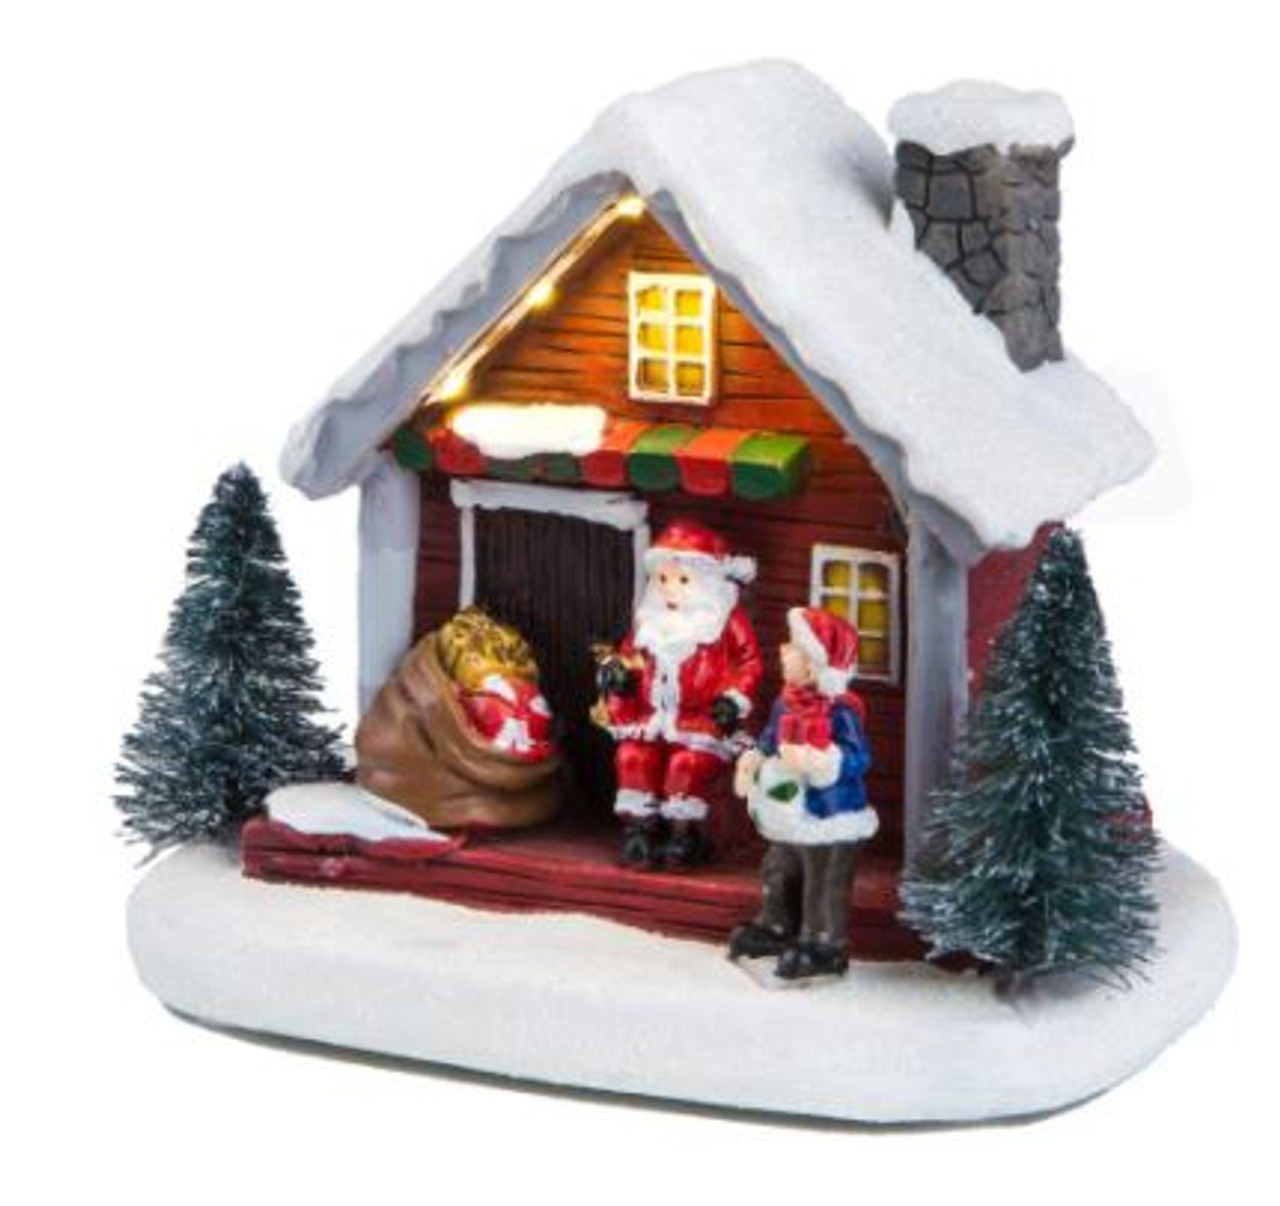 Christmas House with Santa at Door - Light up